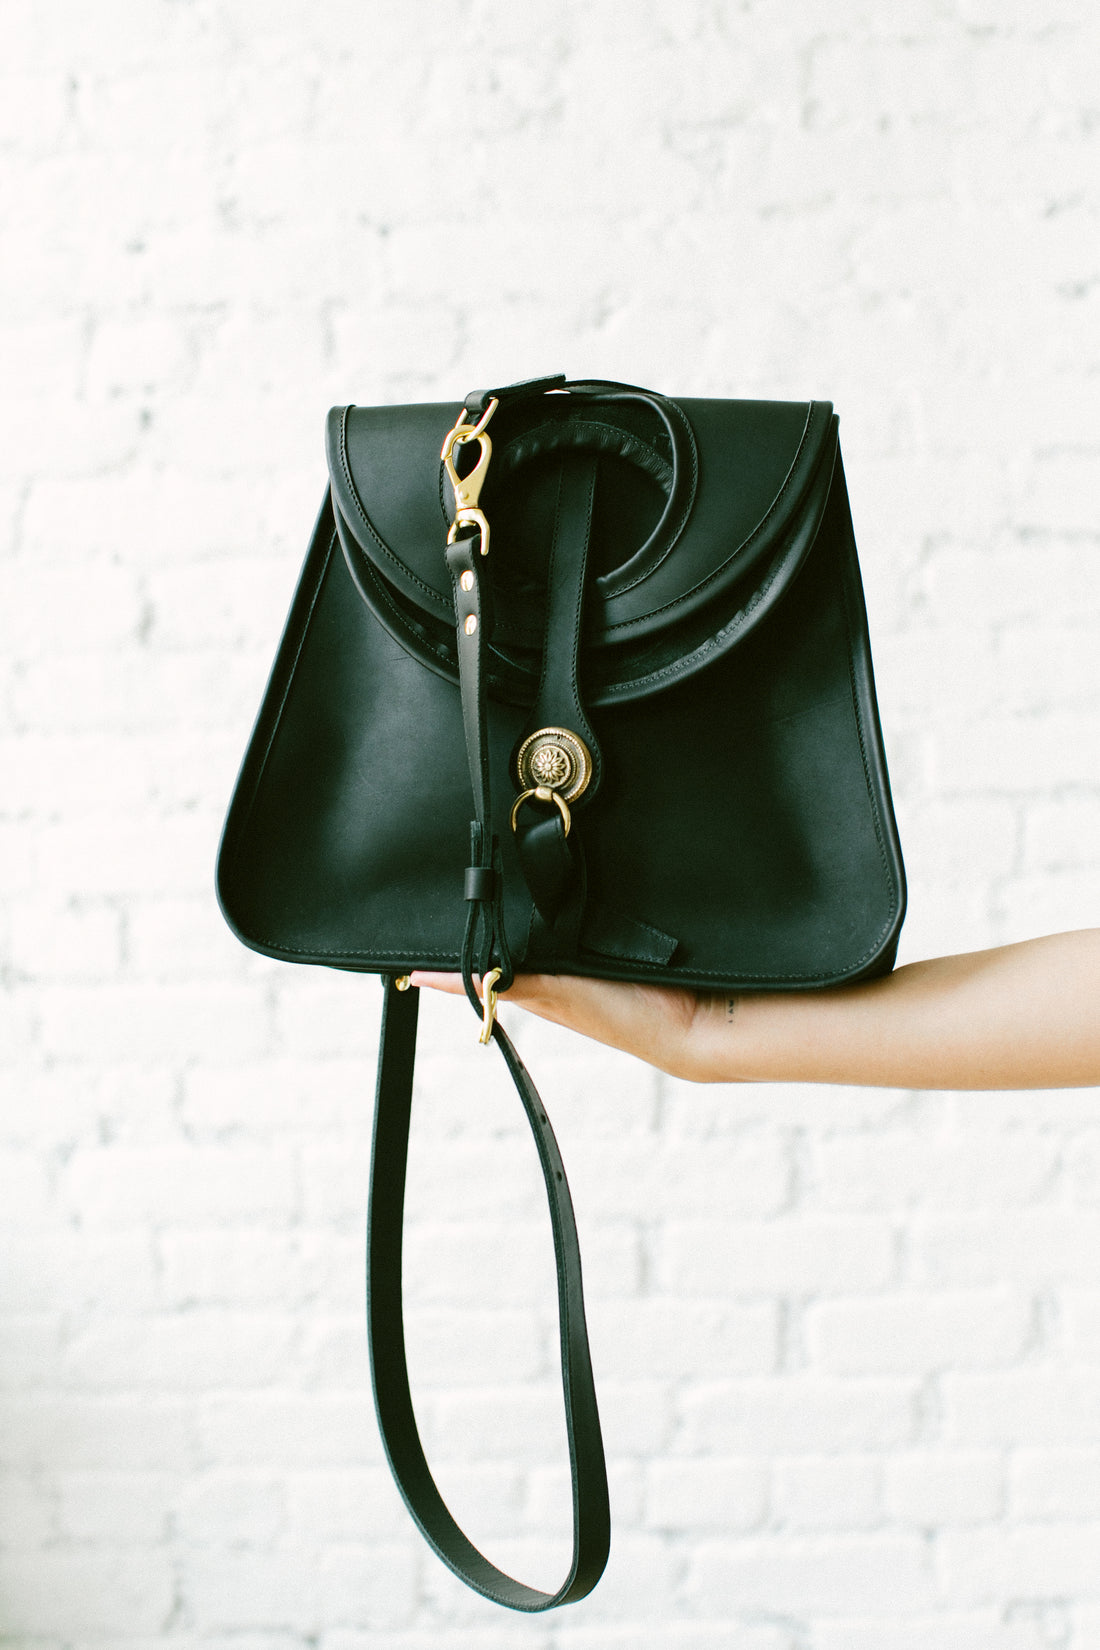 Amelia Crossbody in black leather by Dreamers Supply Co for basic. in Birmingham, Alabama